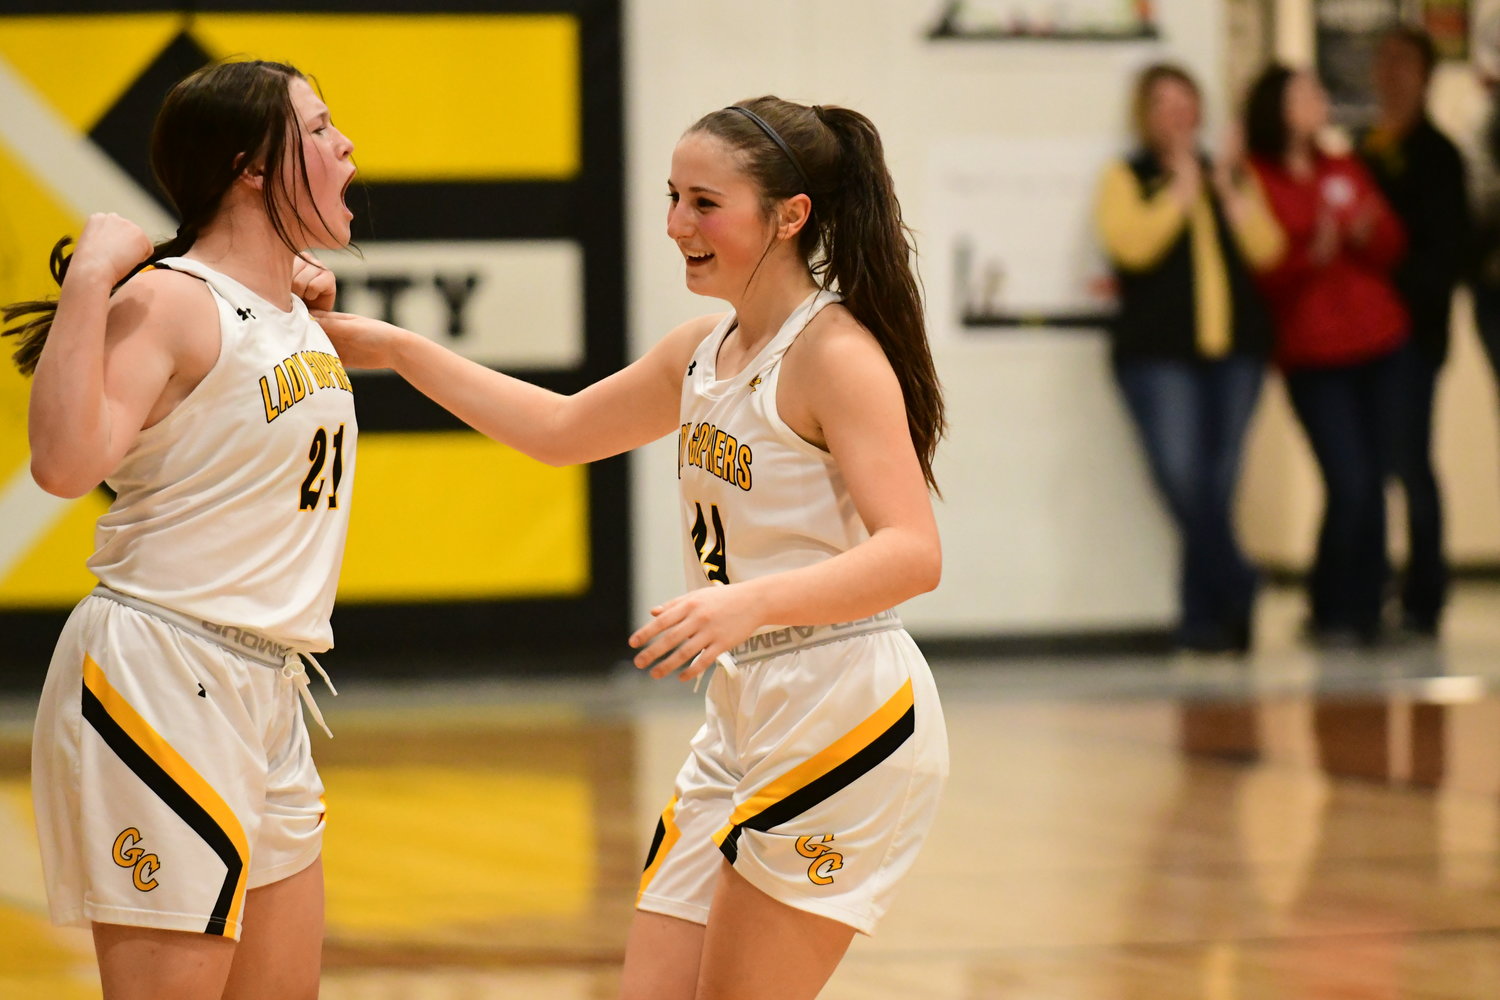 Green City's Lily Helton (left) cheers with teammate Celeste Athon during a timeout to commemorate Athon's 1,000th career point during a win against Novinger on Jan. 21, 2022.